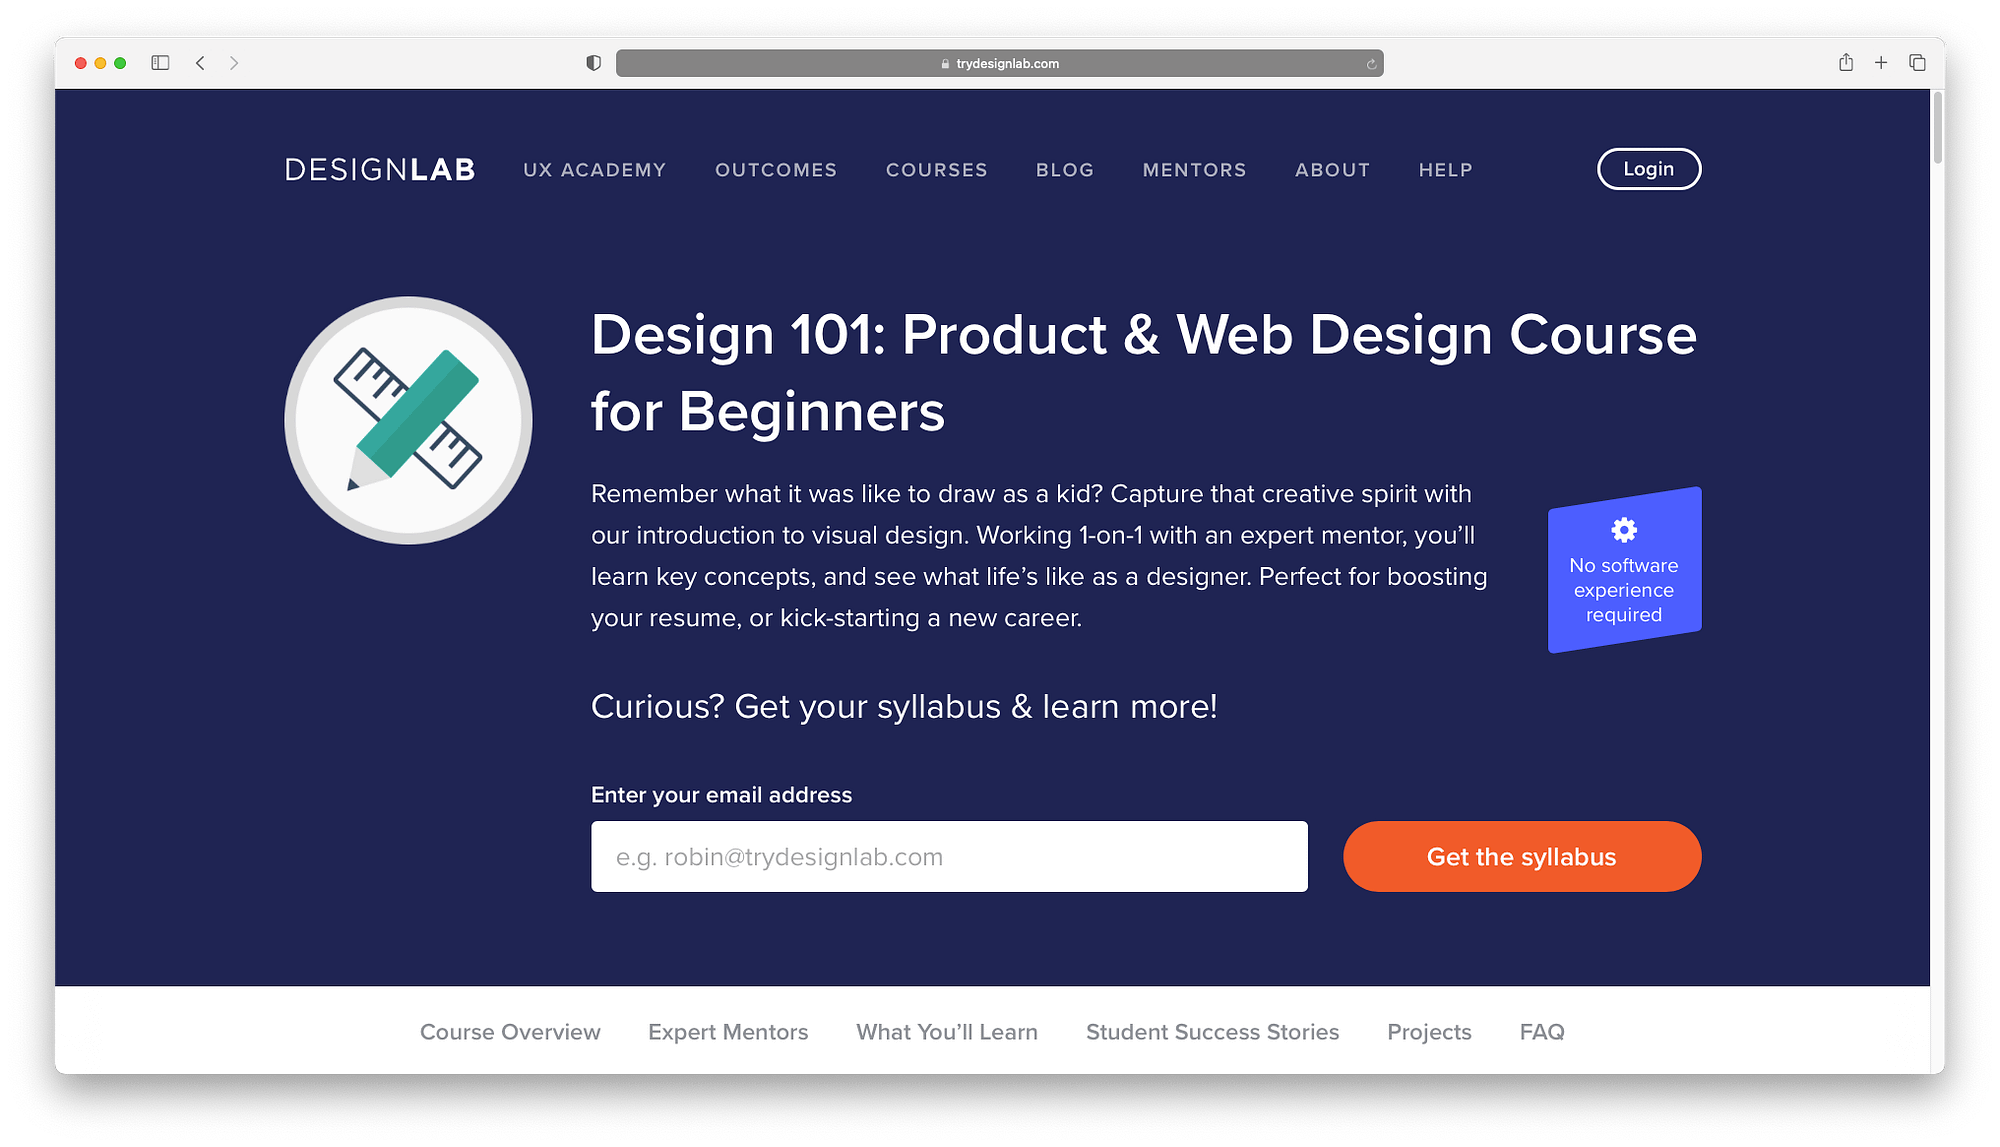 Learn web design online with tis beginner's course from DesignLab